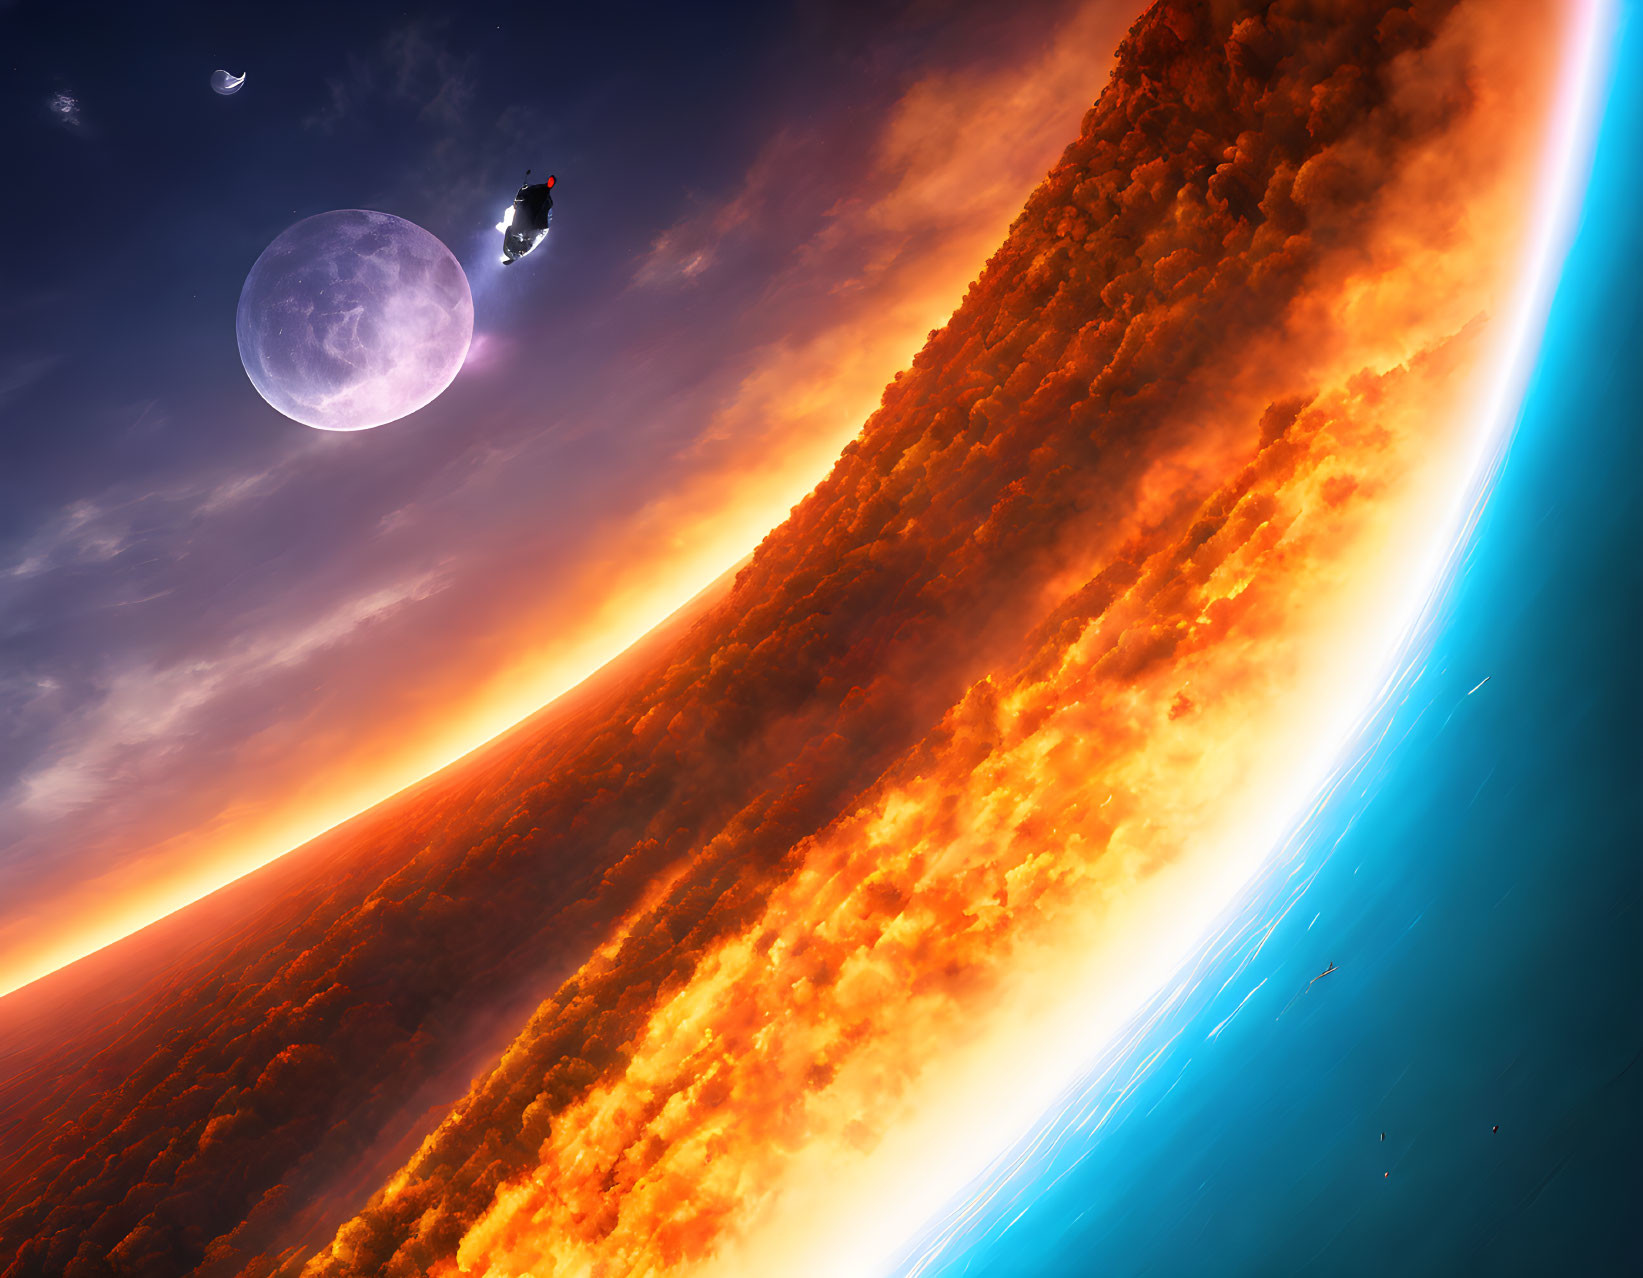 Sci-fi spacecraft exiting fiery planet atmosphere with moon and distant planet.